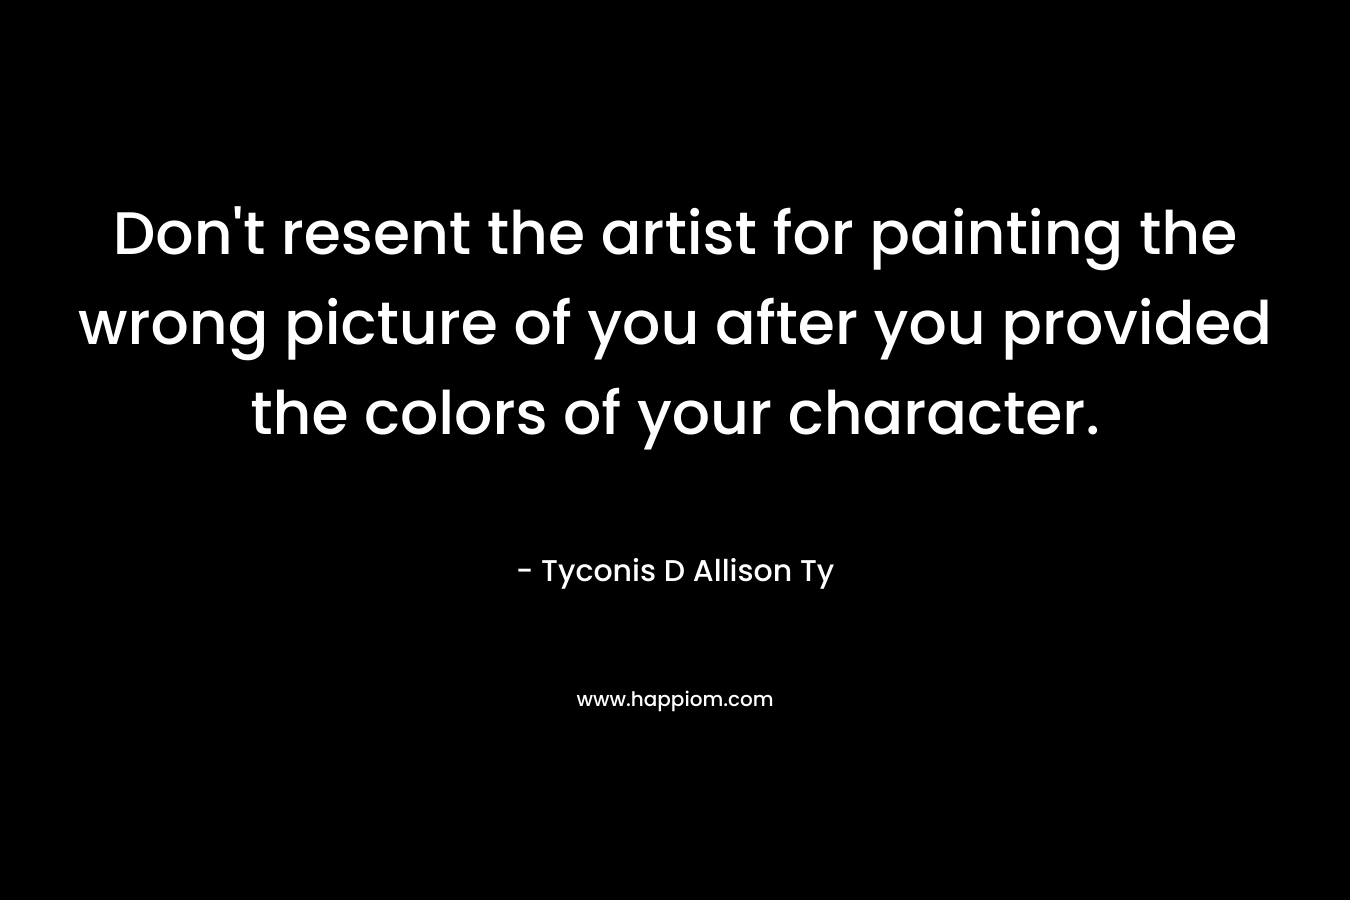 Don't resent the artist for painting the wrong picture of you after you provided the colors of your character.